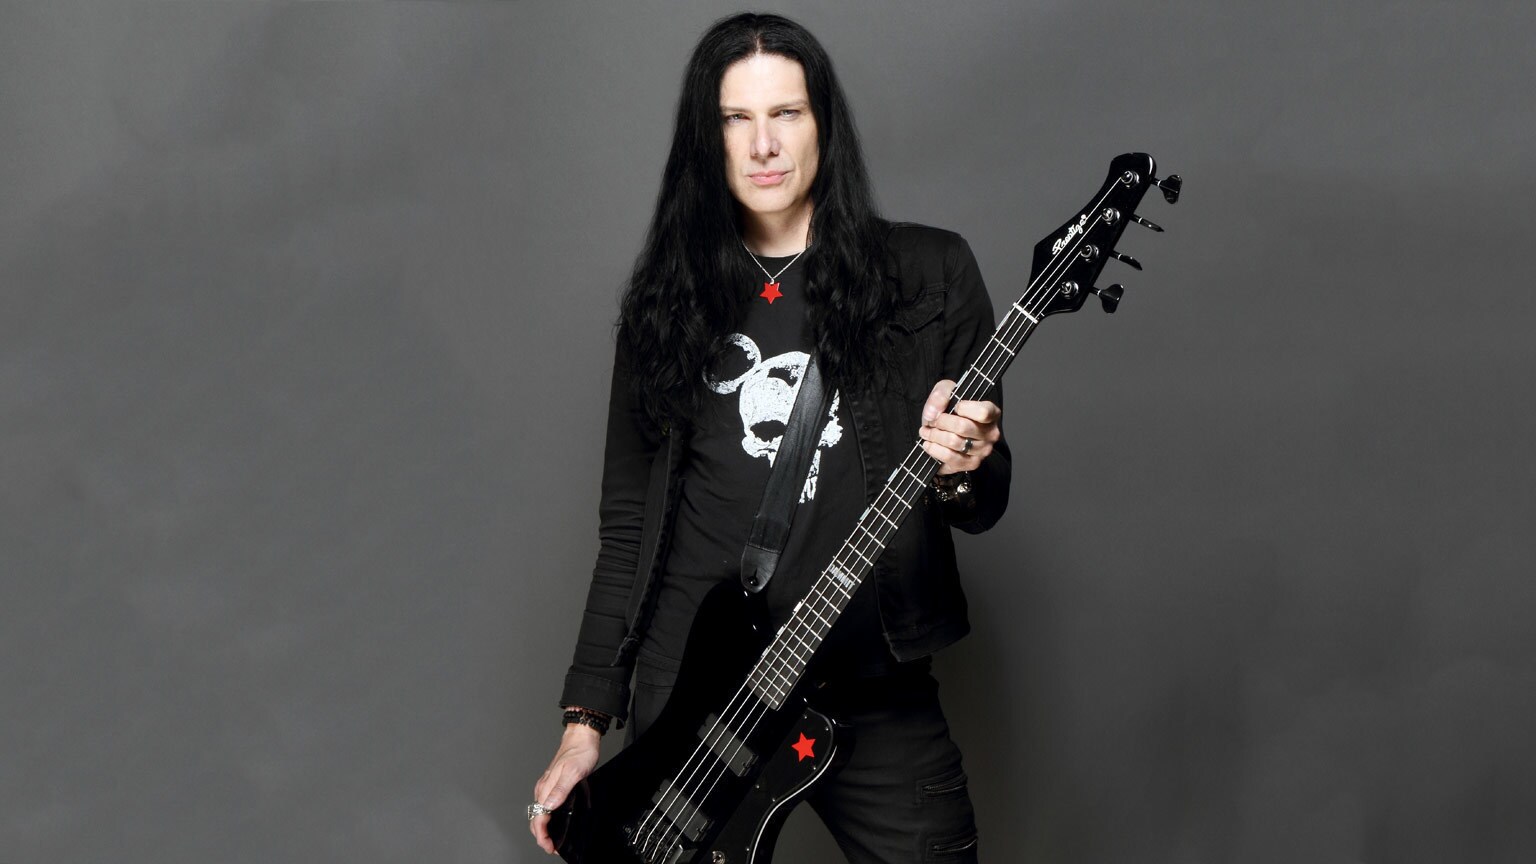 Todd Kerns Wants to Play a Gig on Tatooine